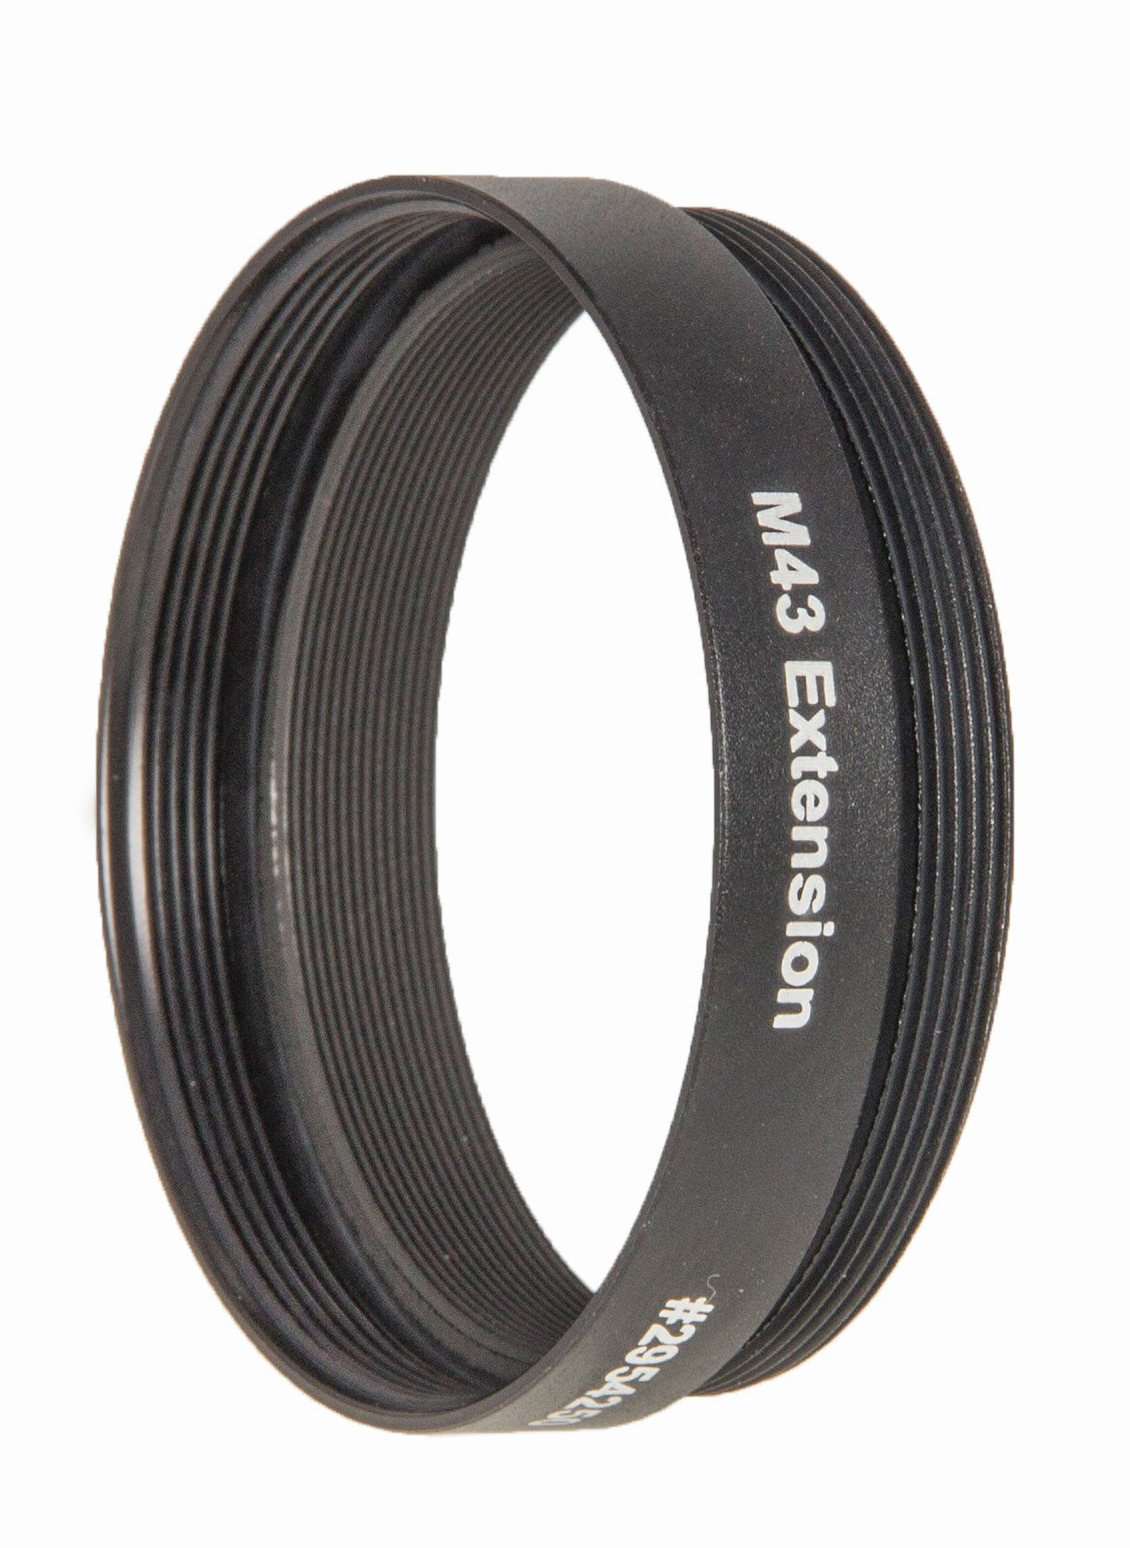 Baader Hyperion/Morpheus M43 Extension Ring